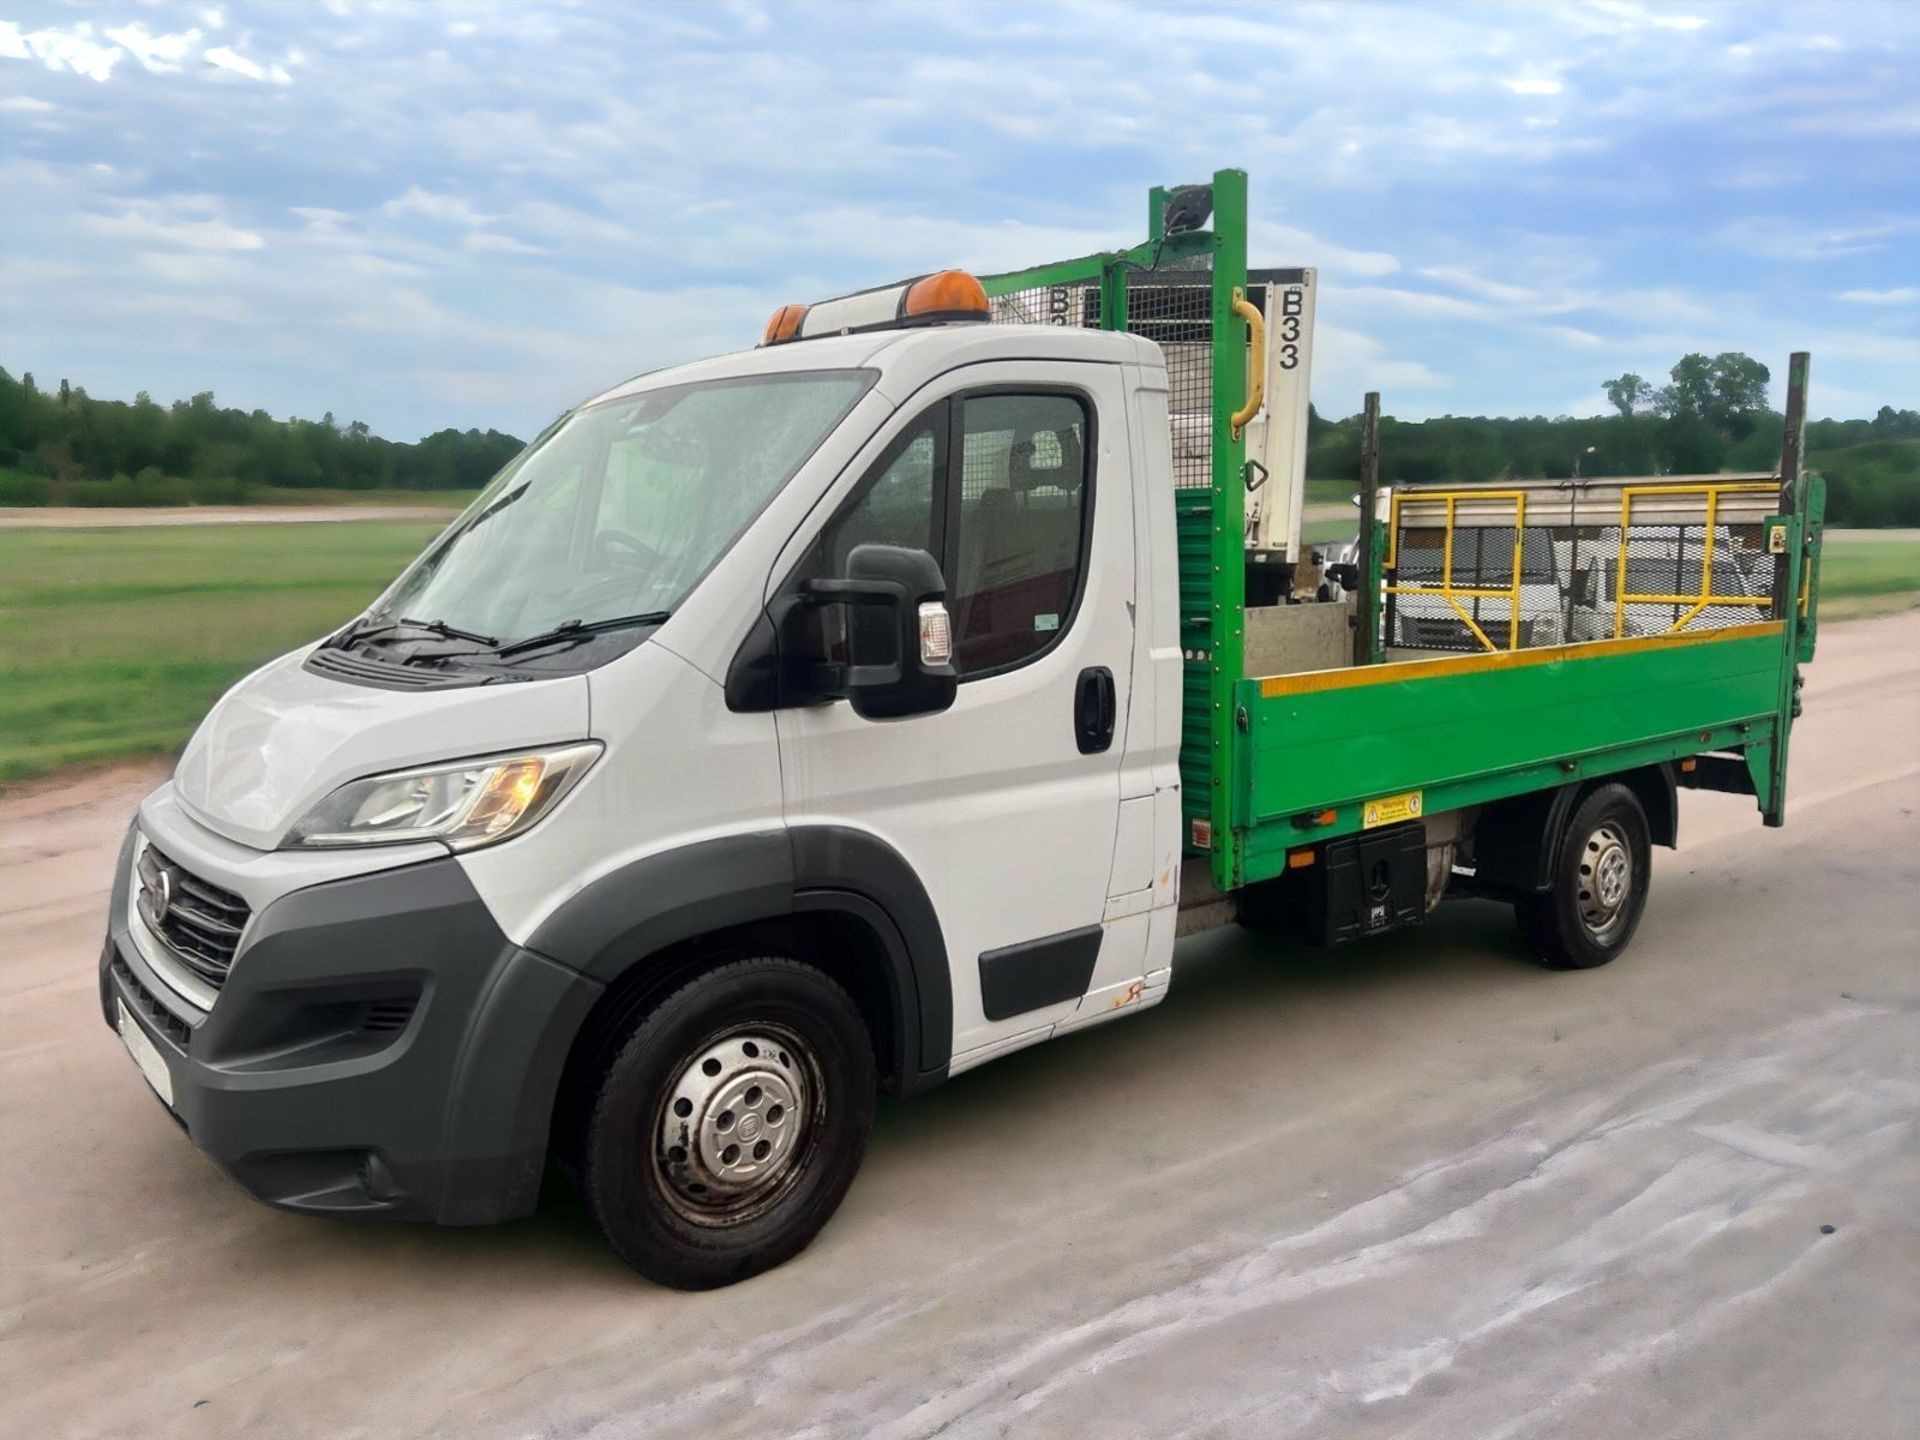 2017 FIAT DUCATO DROPSIDE TRUCK - RELIABLE AND EFFICIENT WORK COMPANION - Image 2 of 6